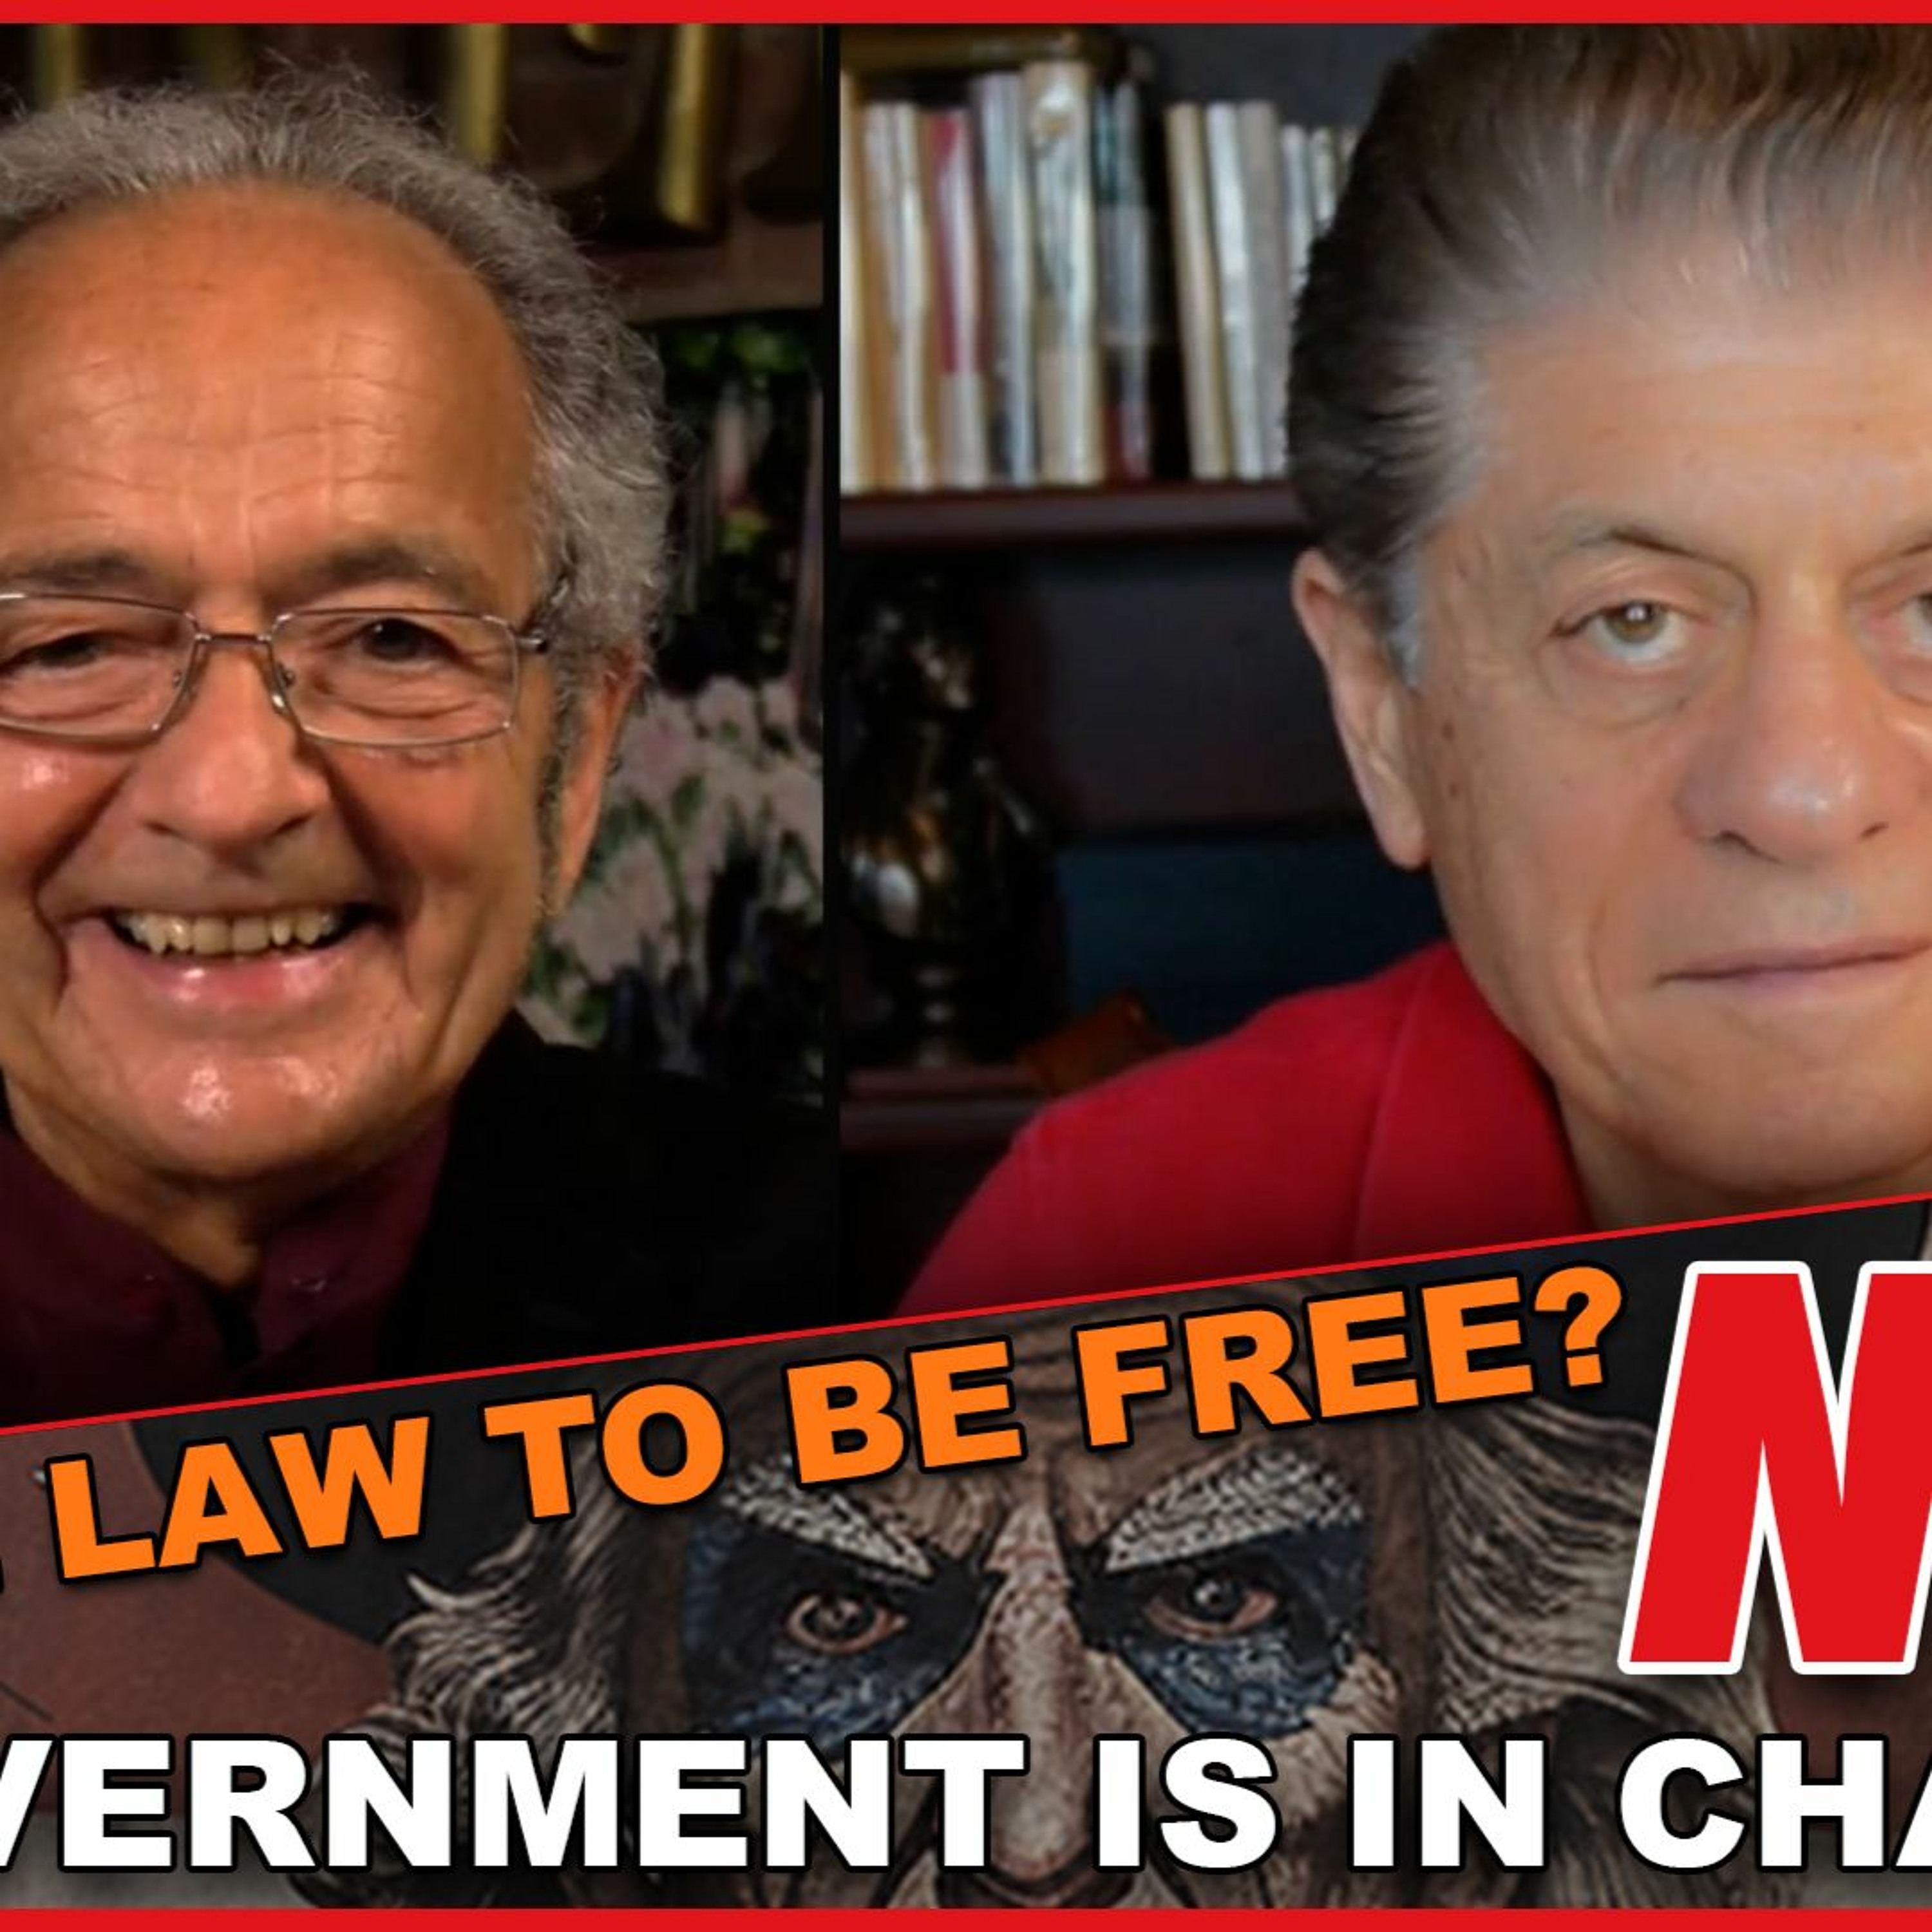 Natural Law To Be Free? No! The Government Is In Charge!